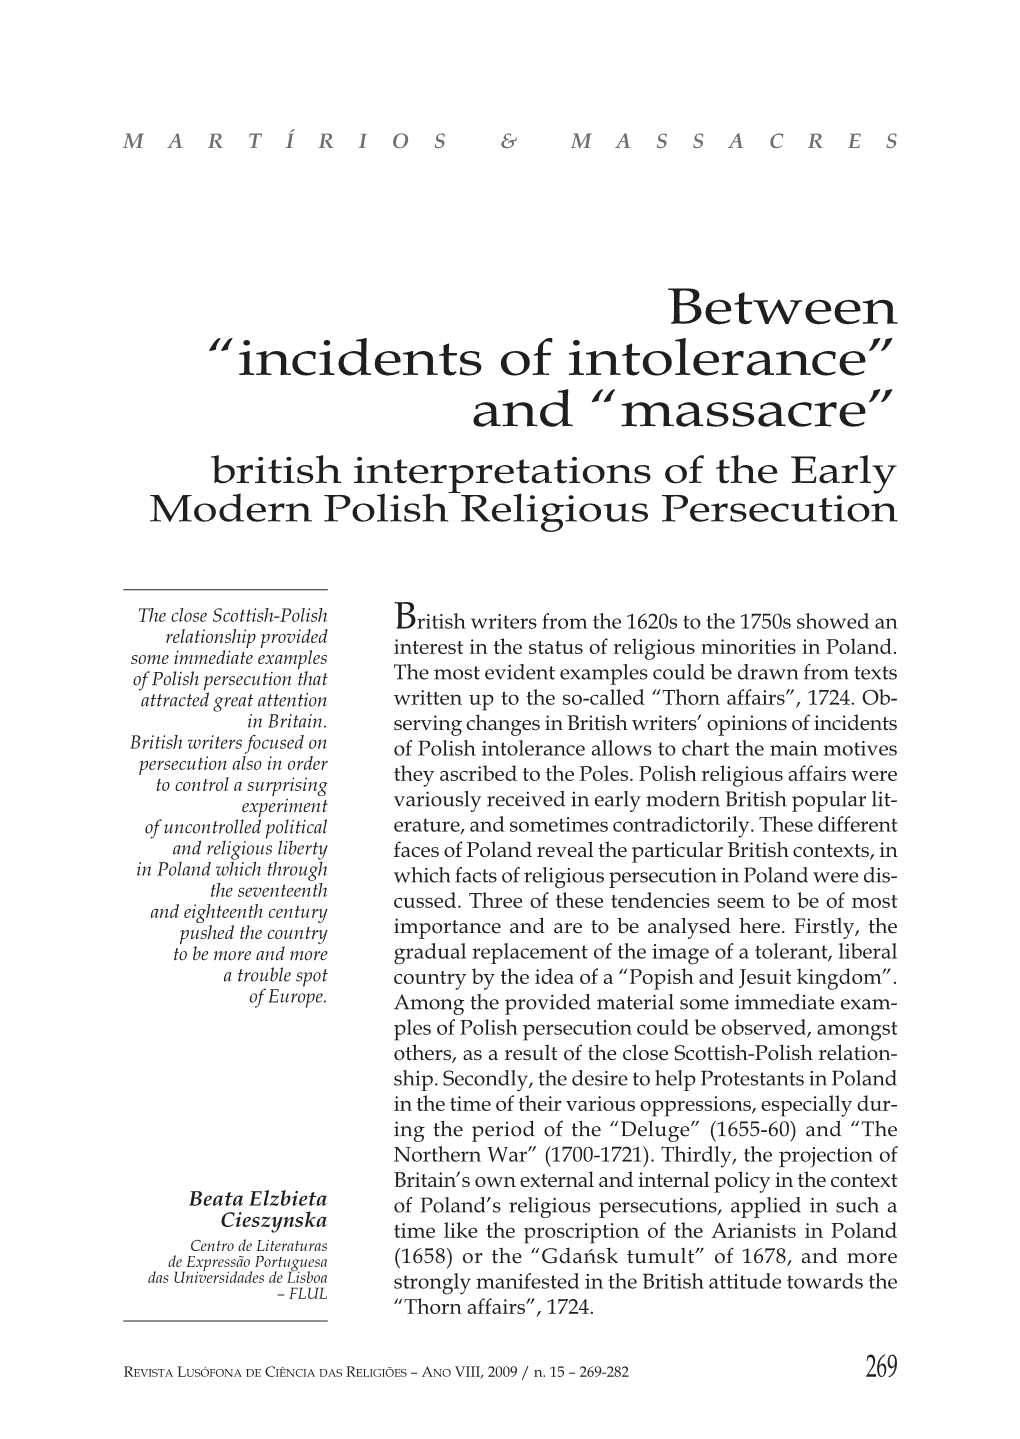 Incidents of Intolerance” and “Massacre” British Interpretations of the Early Modern Polish Religious Persecution